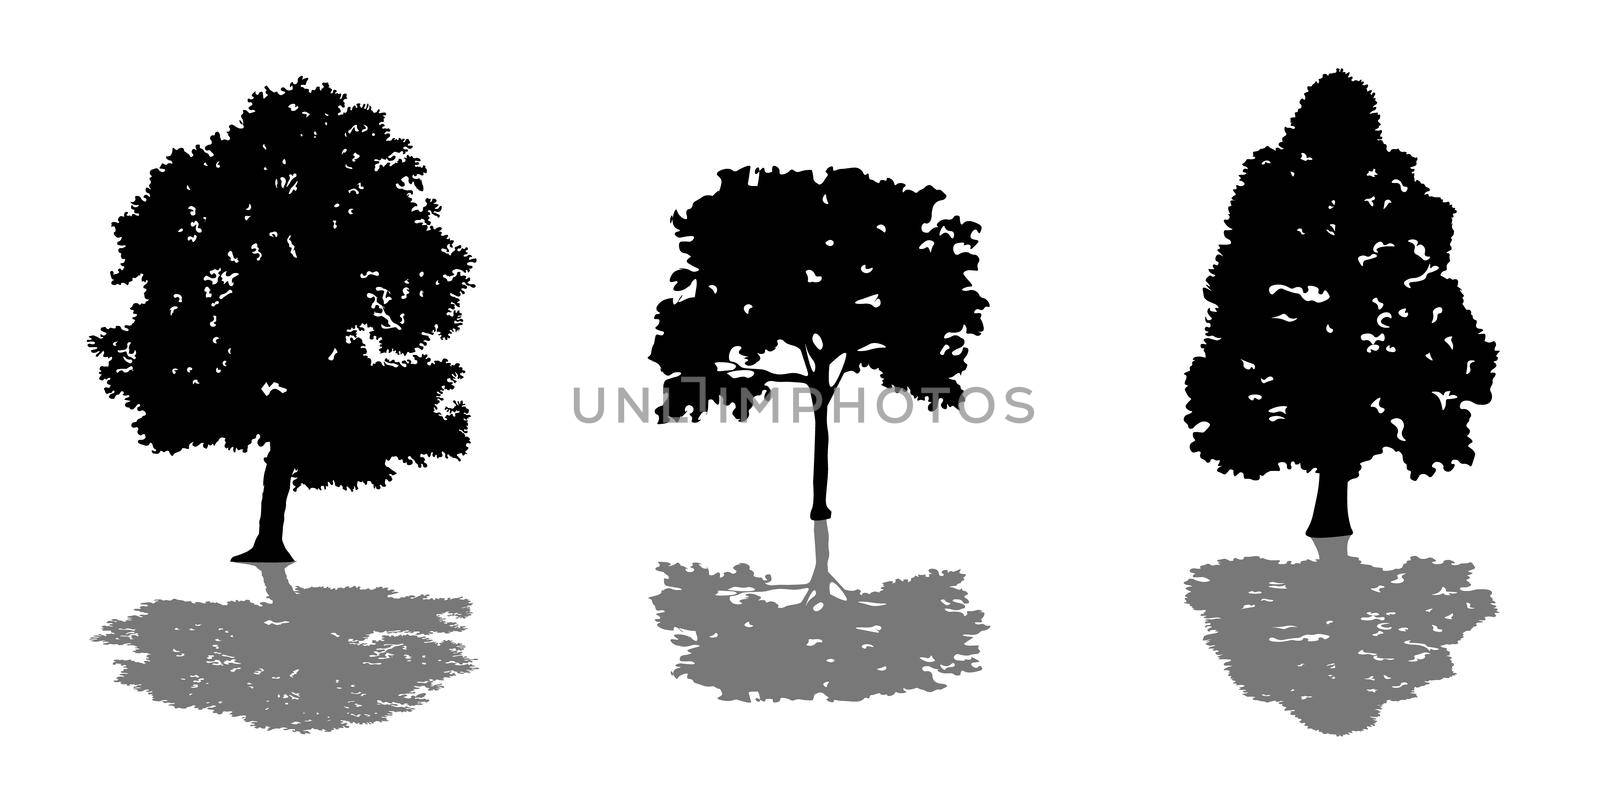 Tree set of black silhouettes with shadow illustration